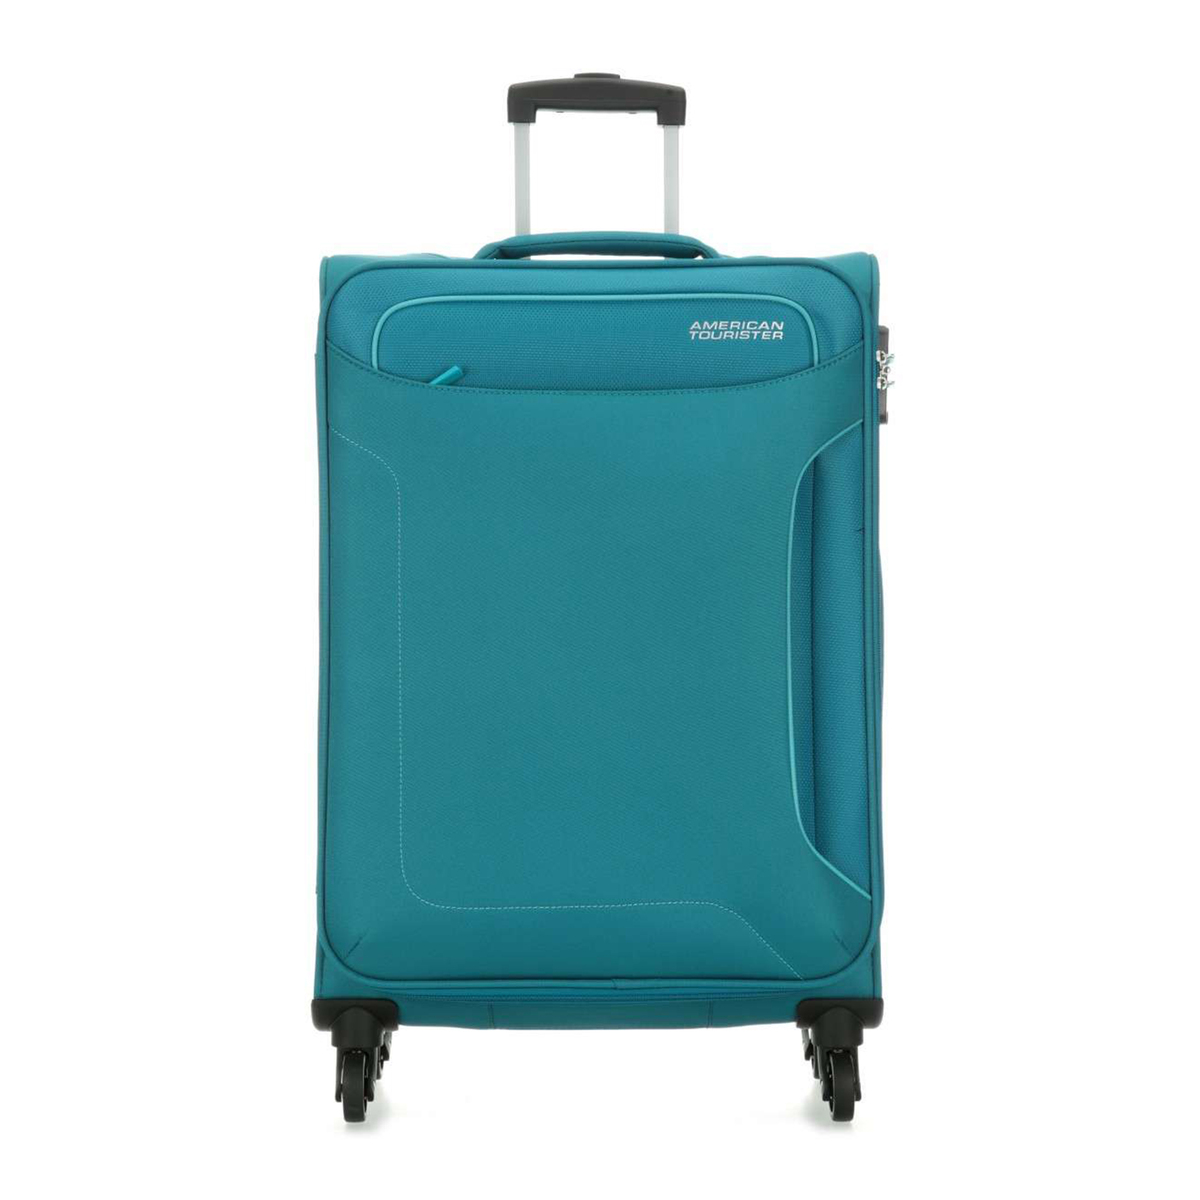 American Tourister Holiday 4 Wheel Soft Trolley, 55 cm, Teal